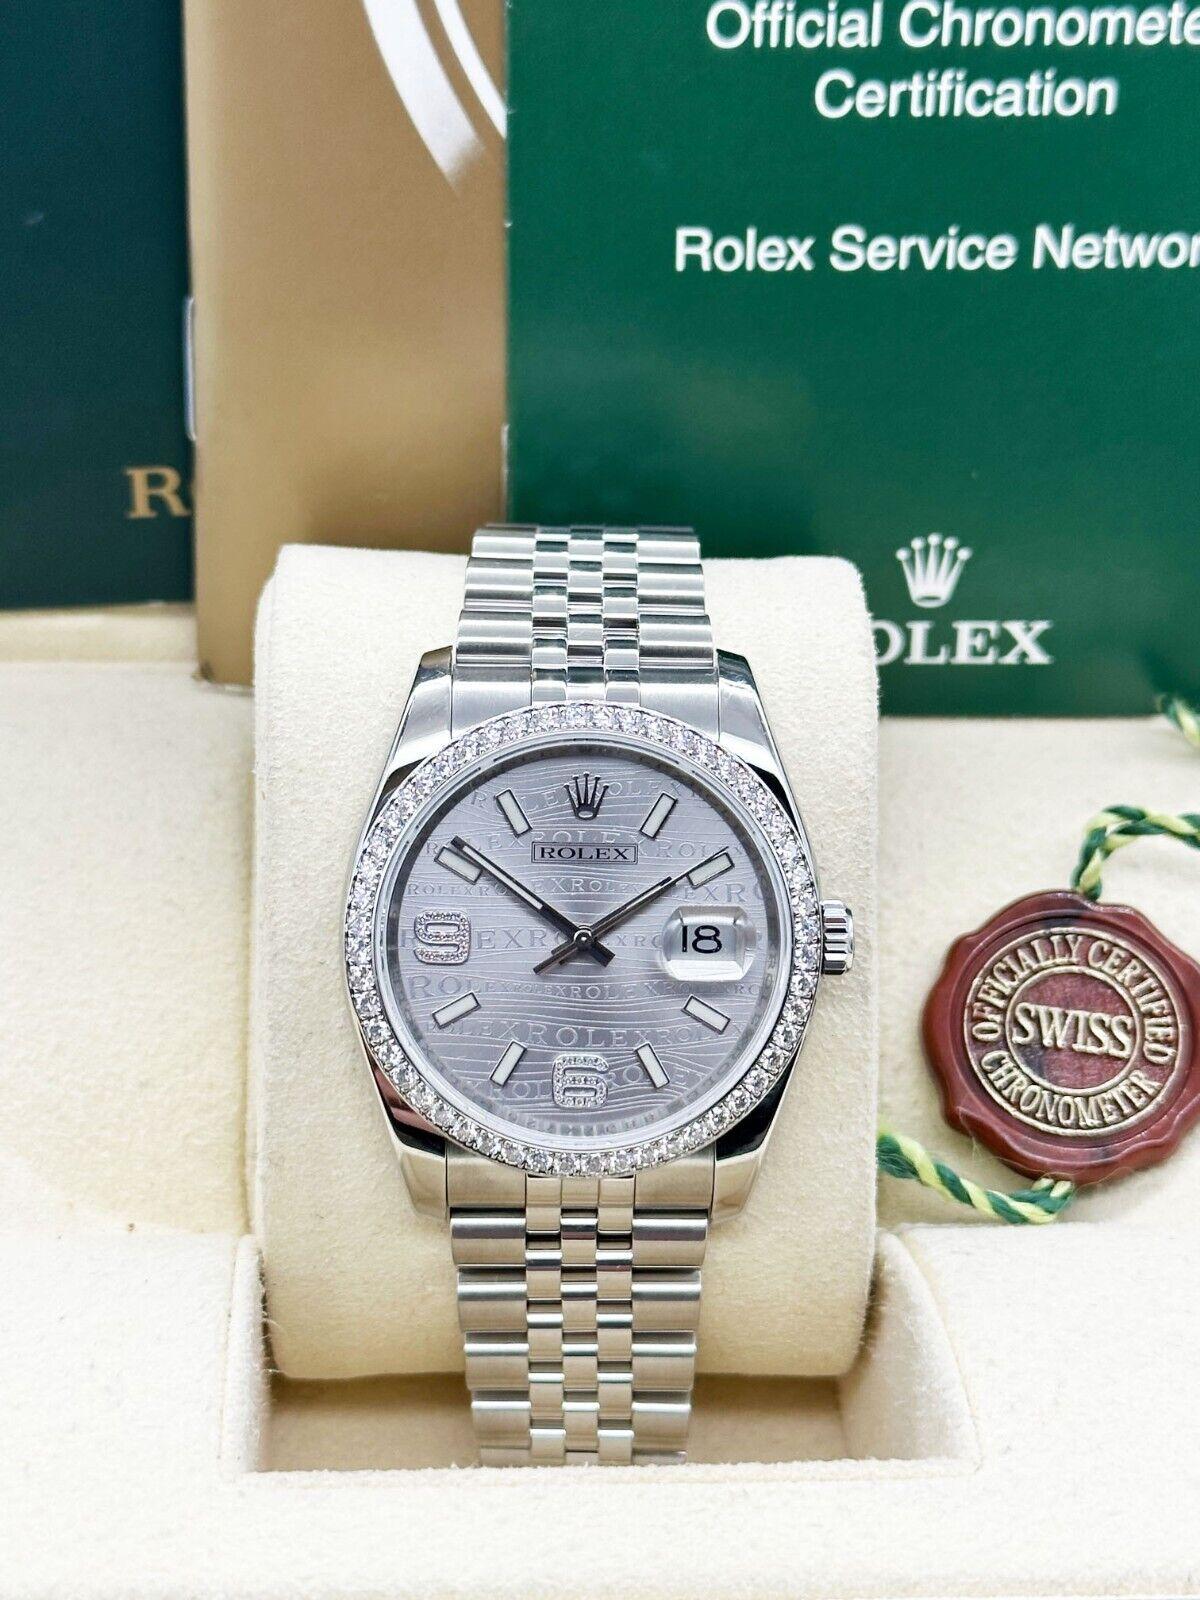 Rolex 116244 Datejust Rhodium Wave Dial Diamond Bezel Stainless Box Booklet In Excellent Condition For Sale In San Diego, CA